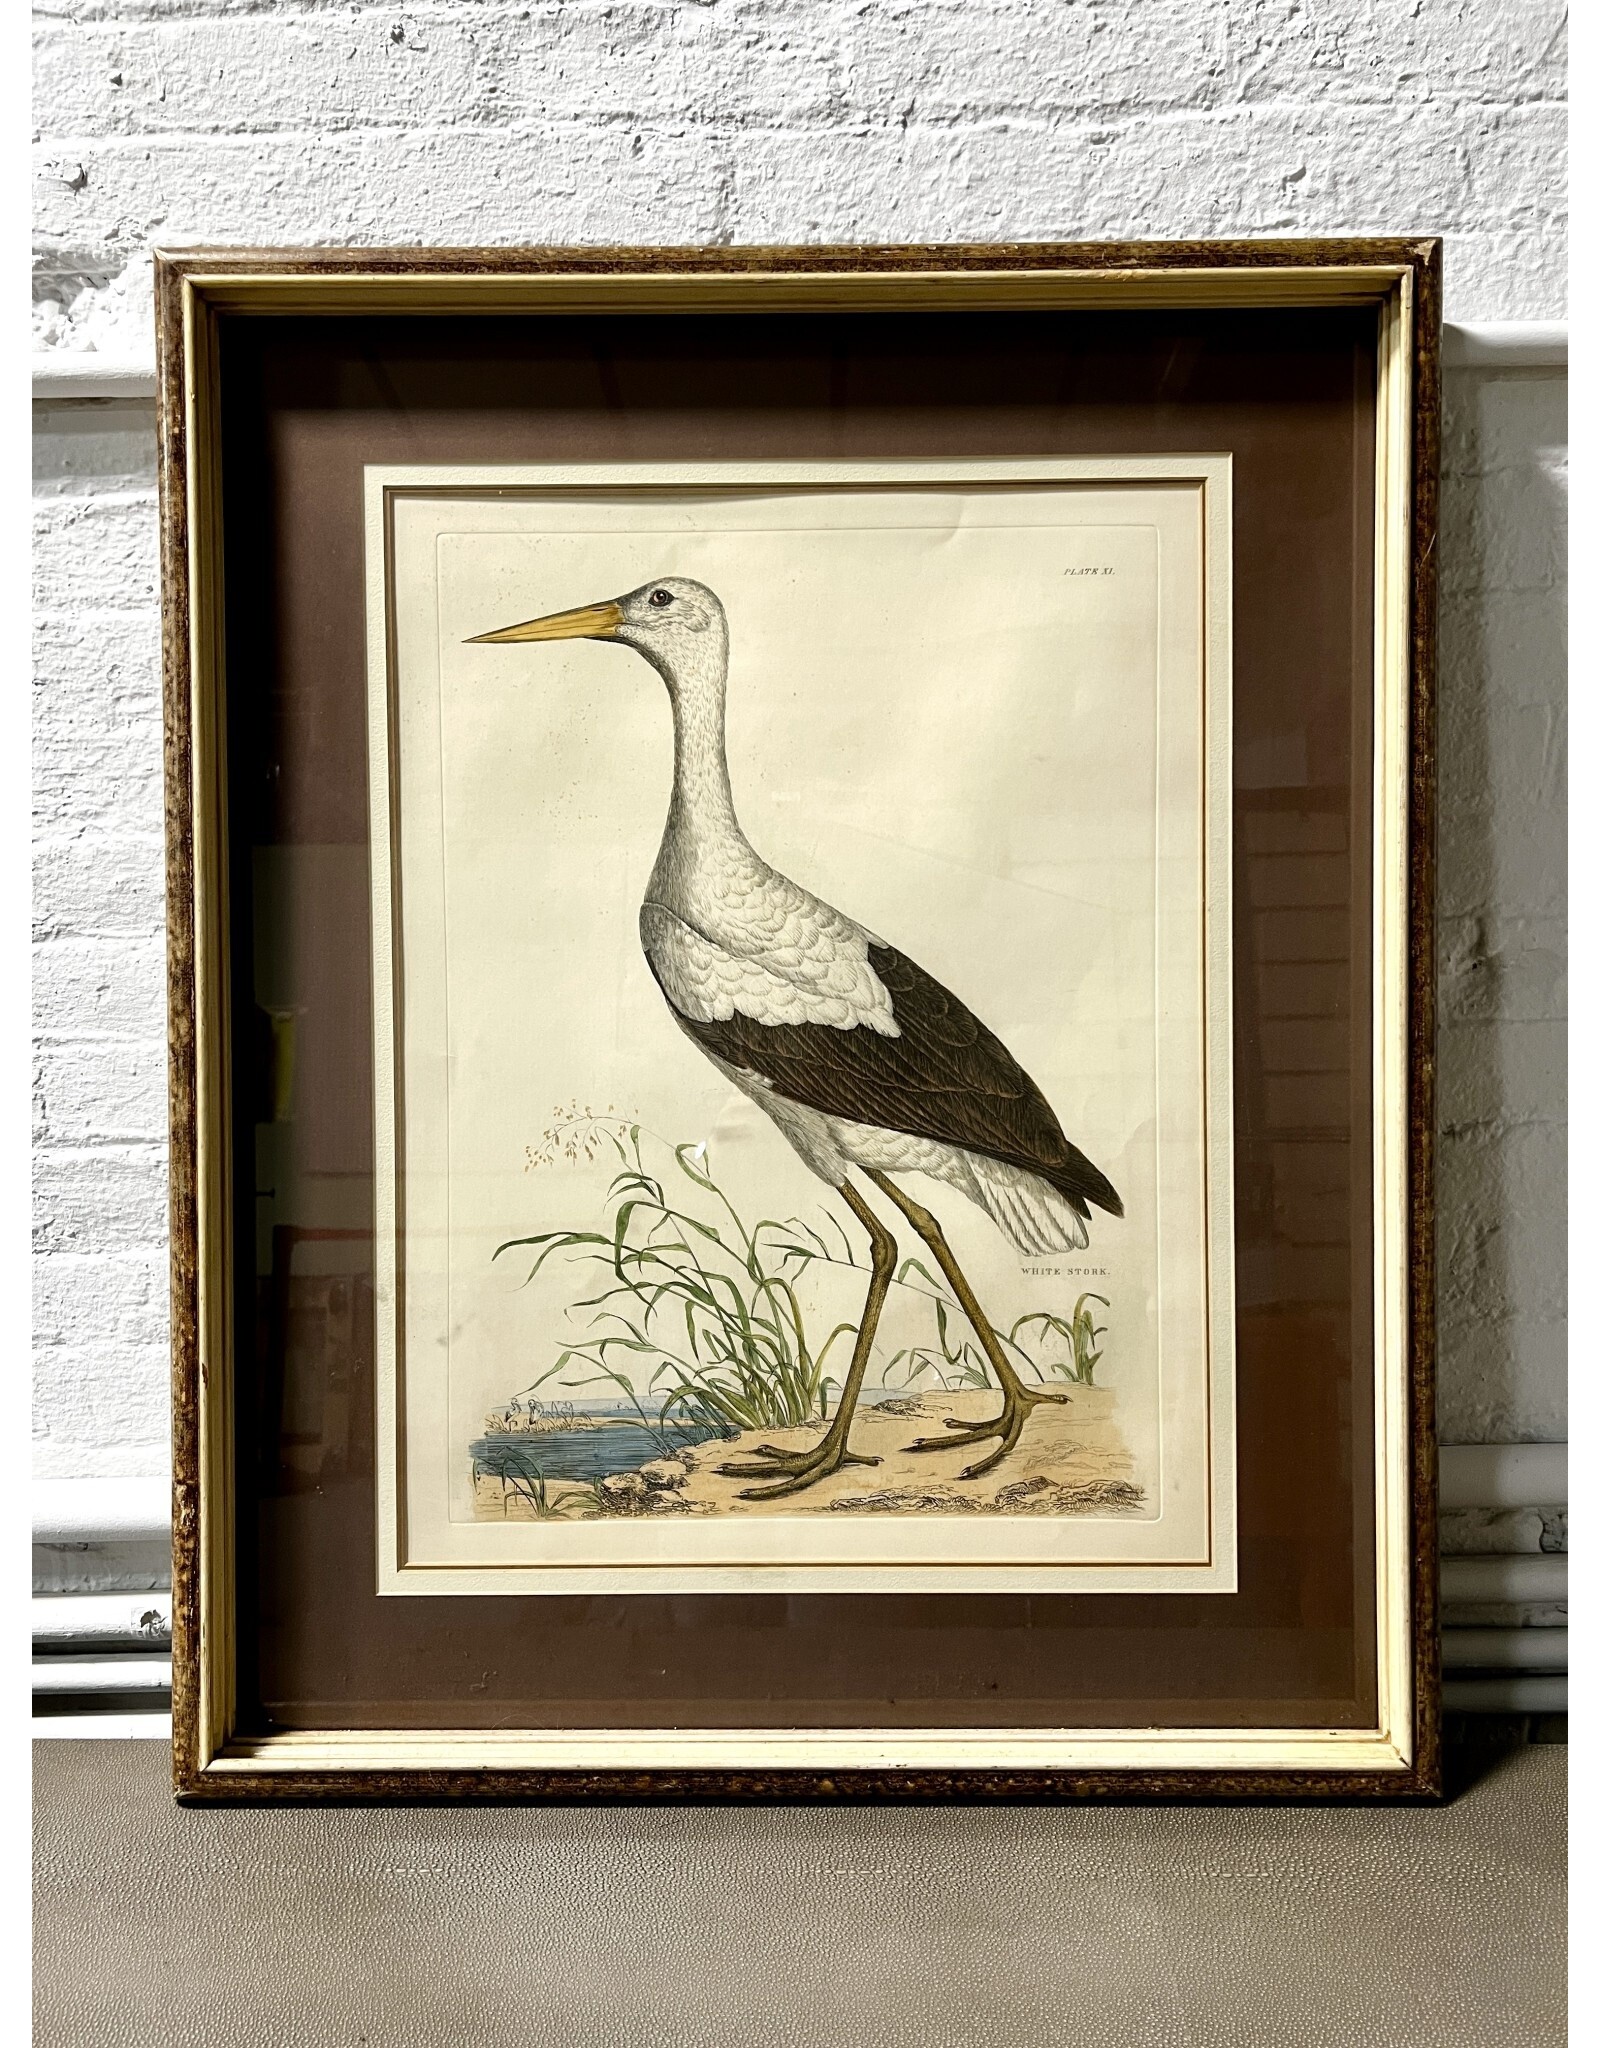 White Stork, framed colorized etching